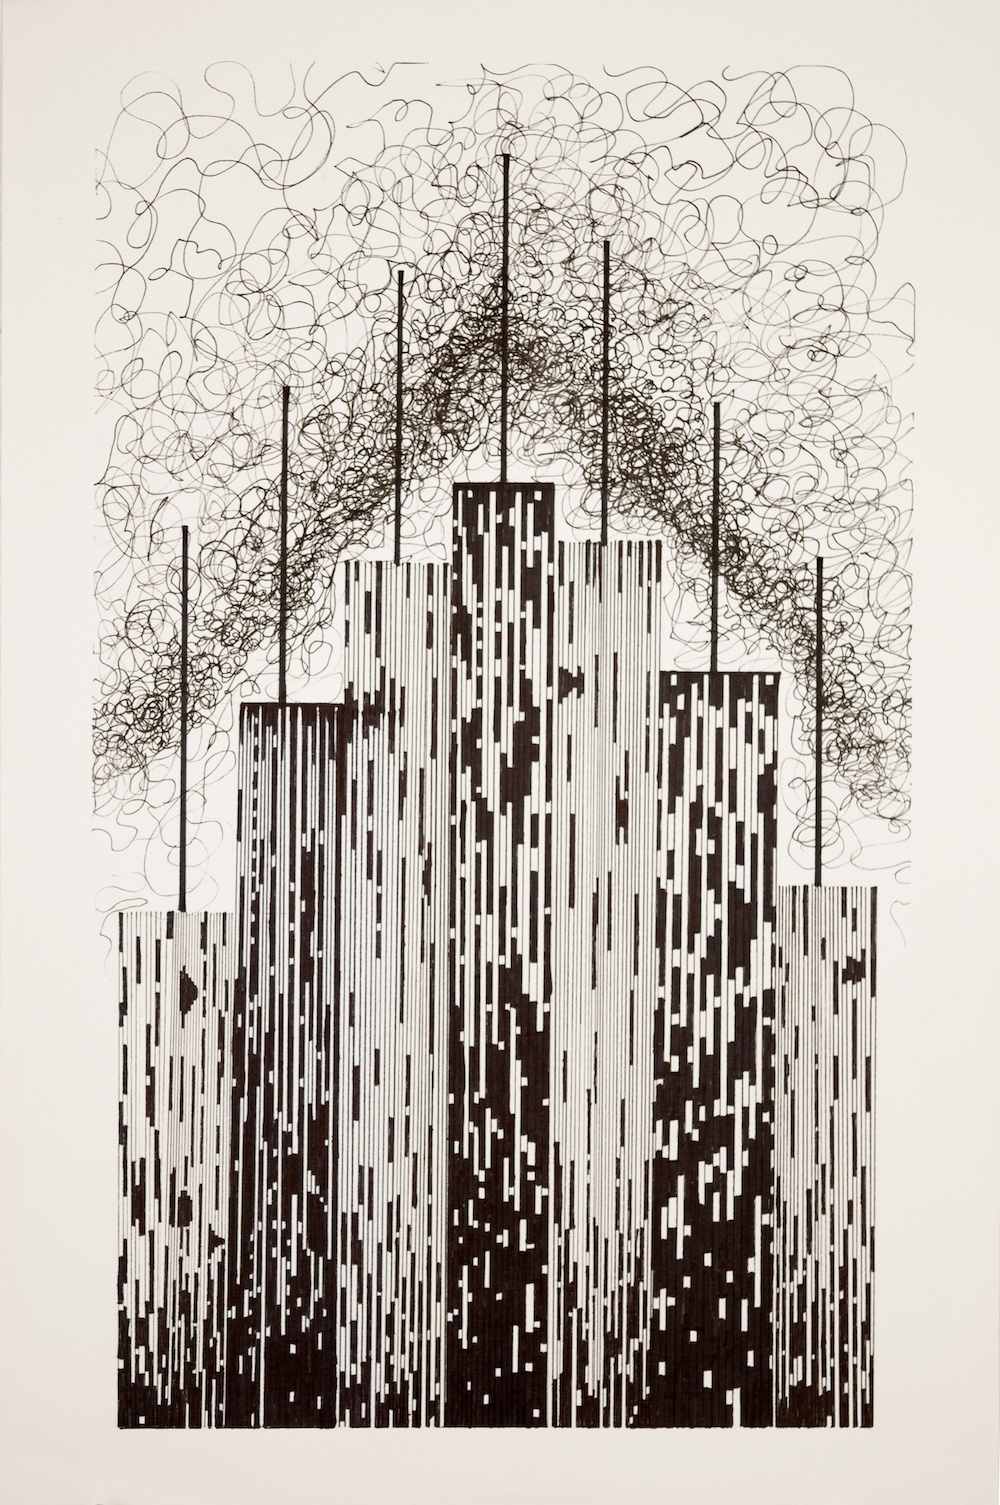 Ink pen drawing of what appears to be a city sky line